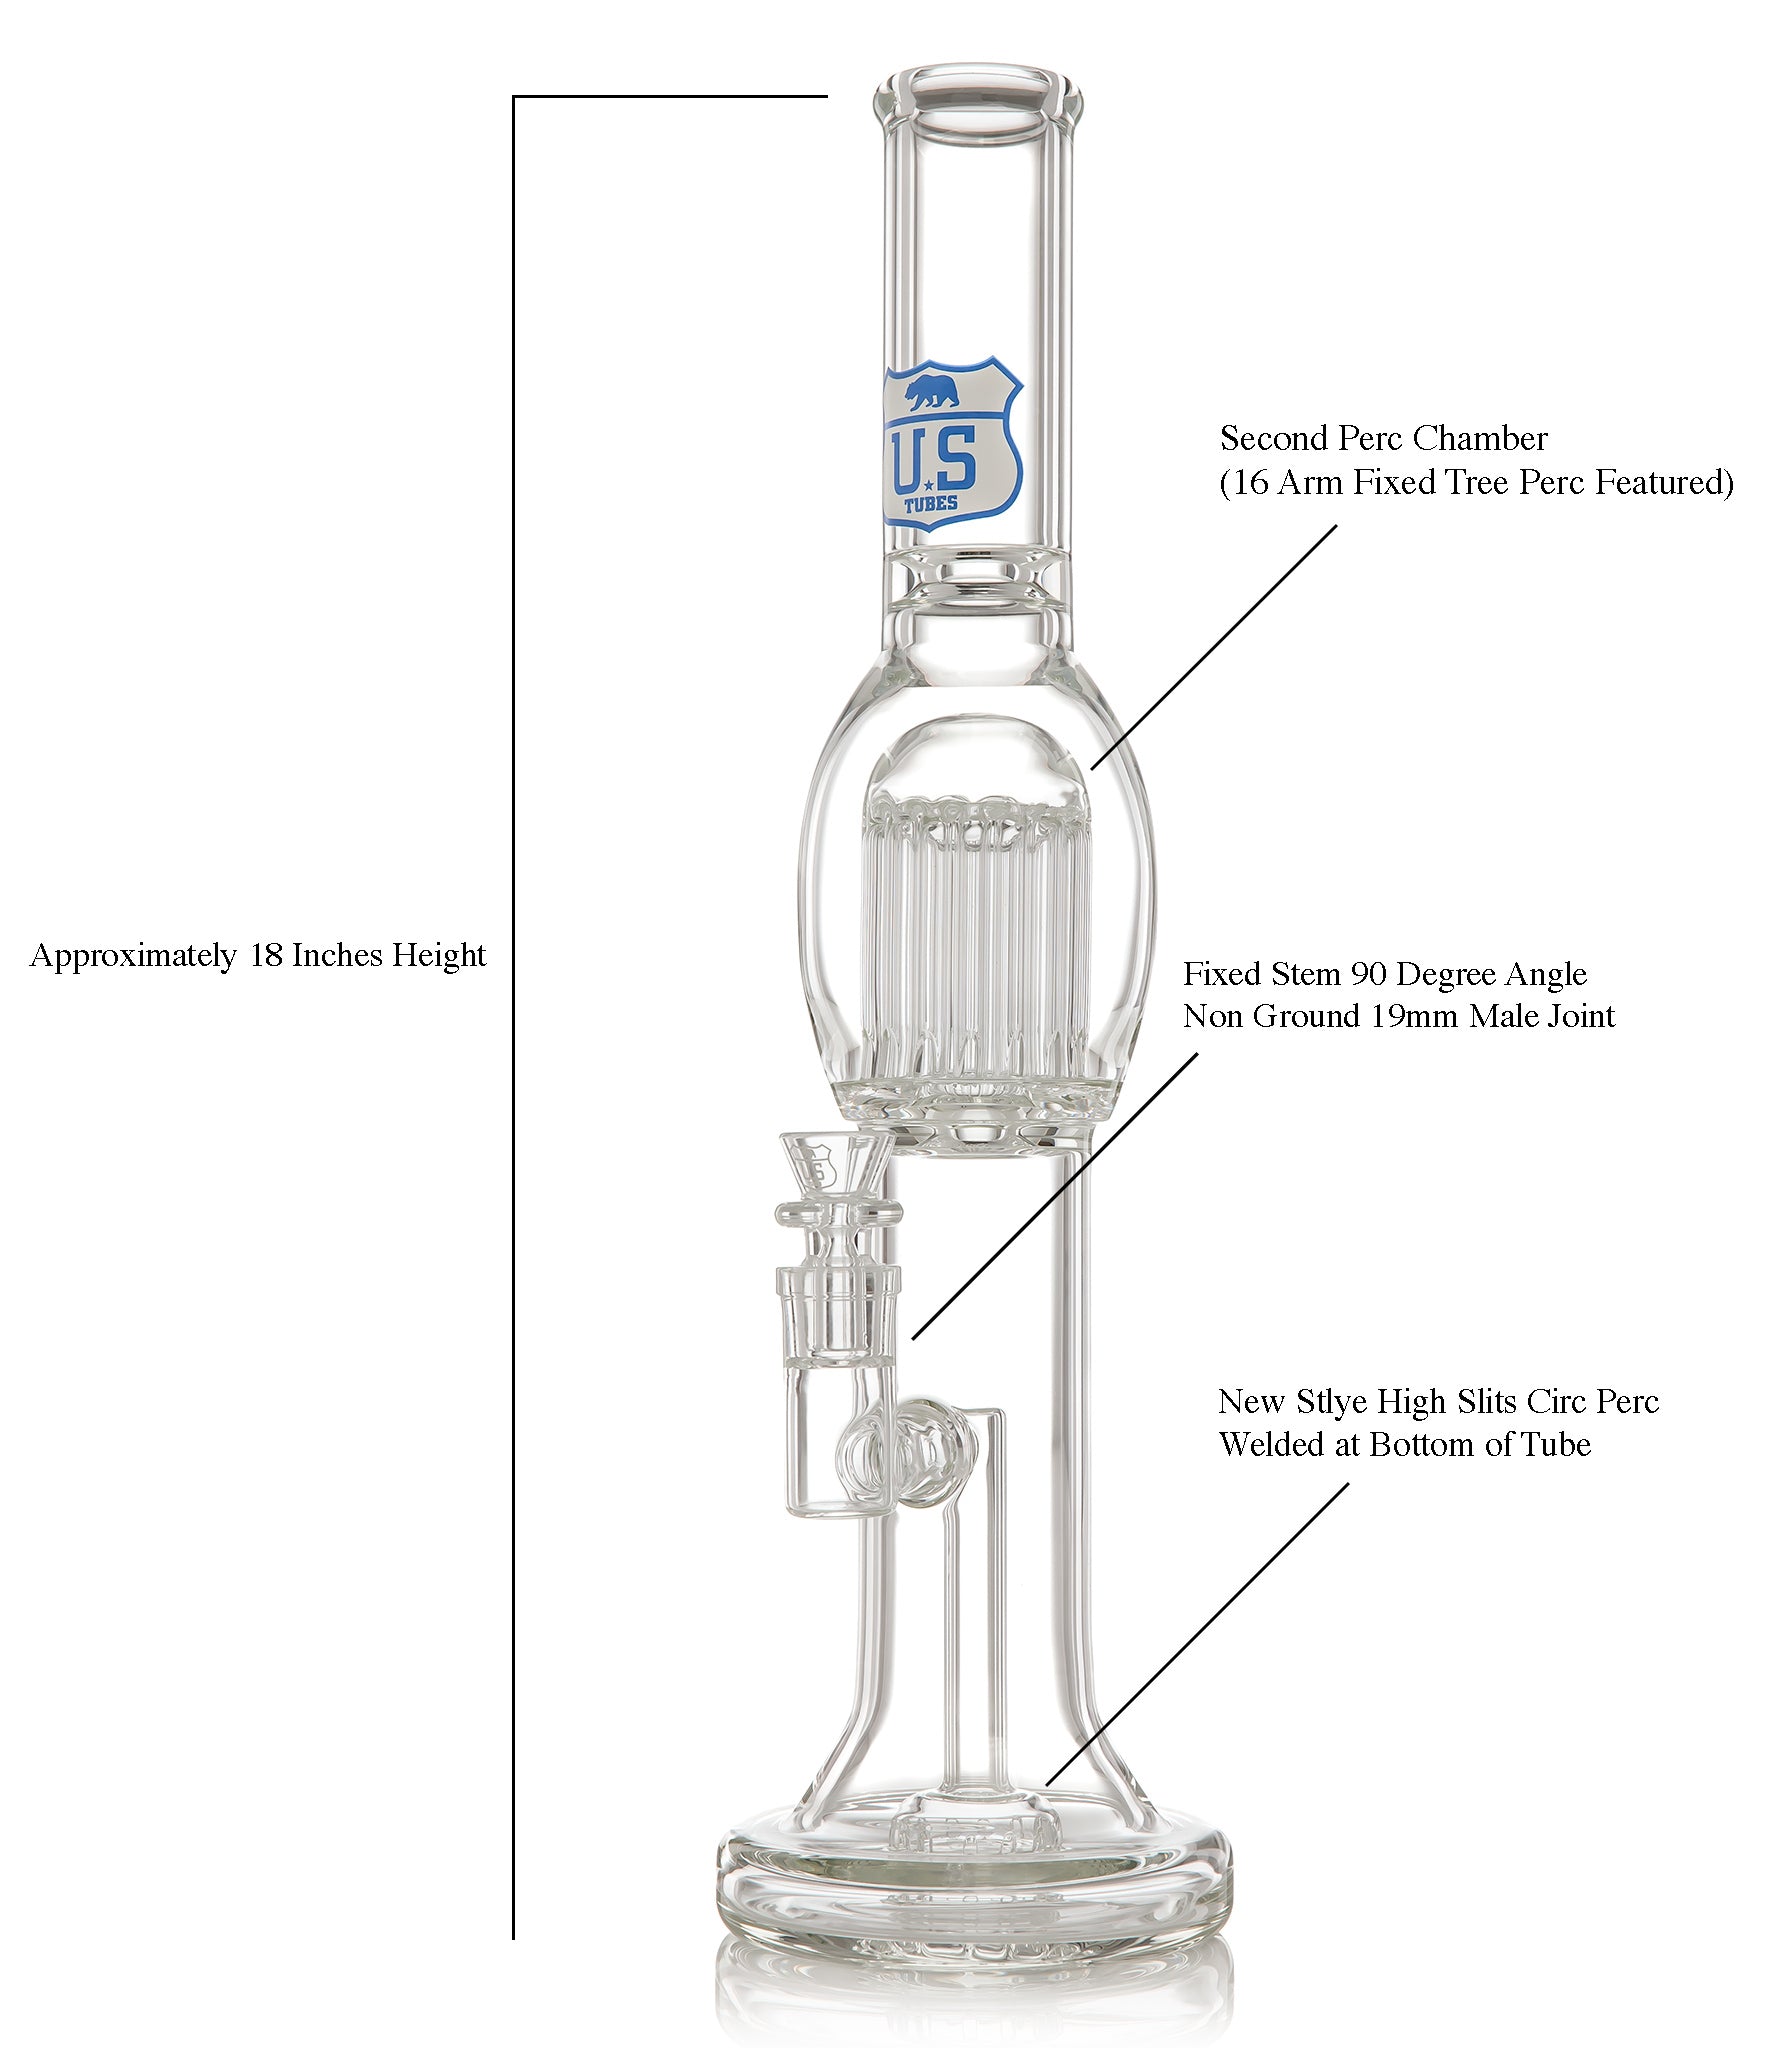 Hybrid Fixed Stem with 16 Arm Tree Perc with Listed Specs 18 Inches Approx Height, 19mm Male Non ground joint, 16 arm tree perc